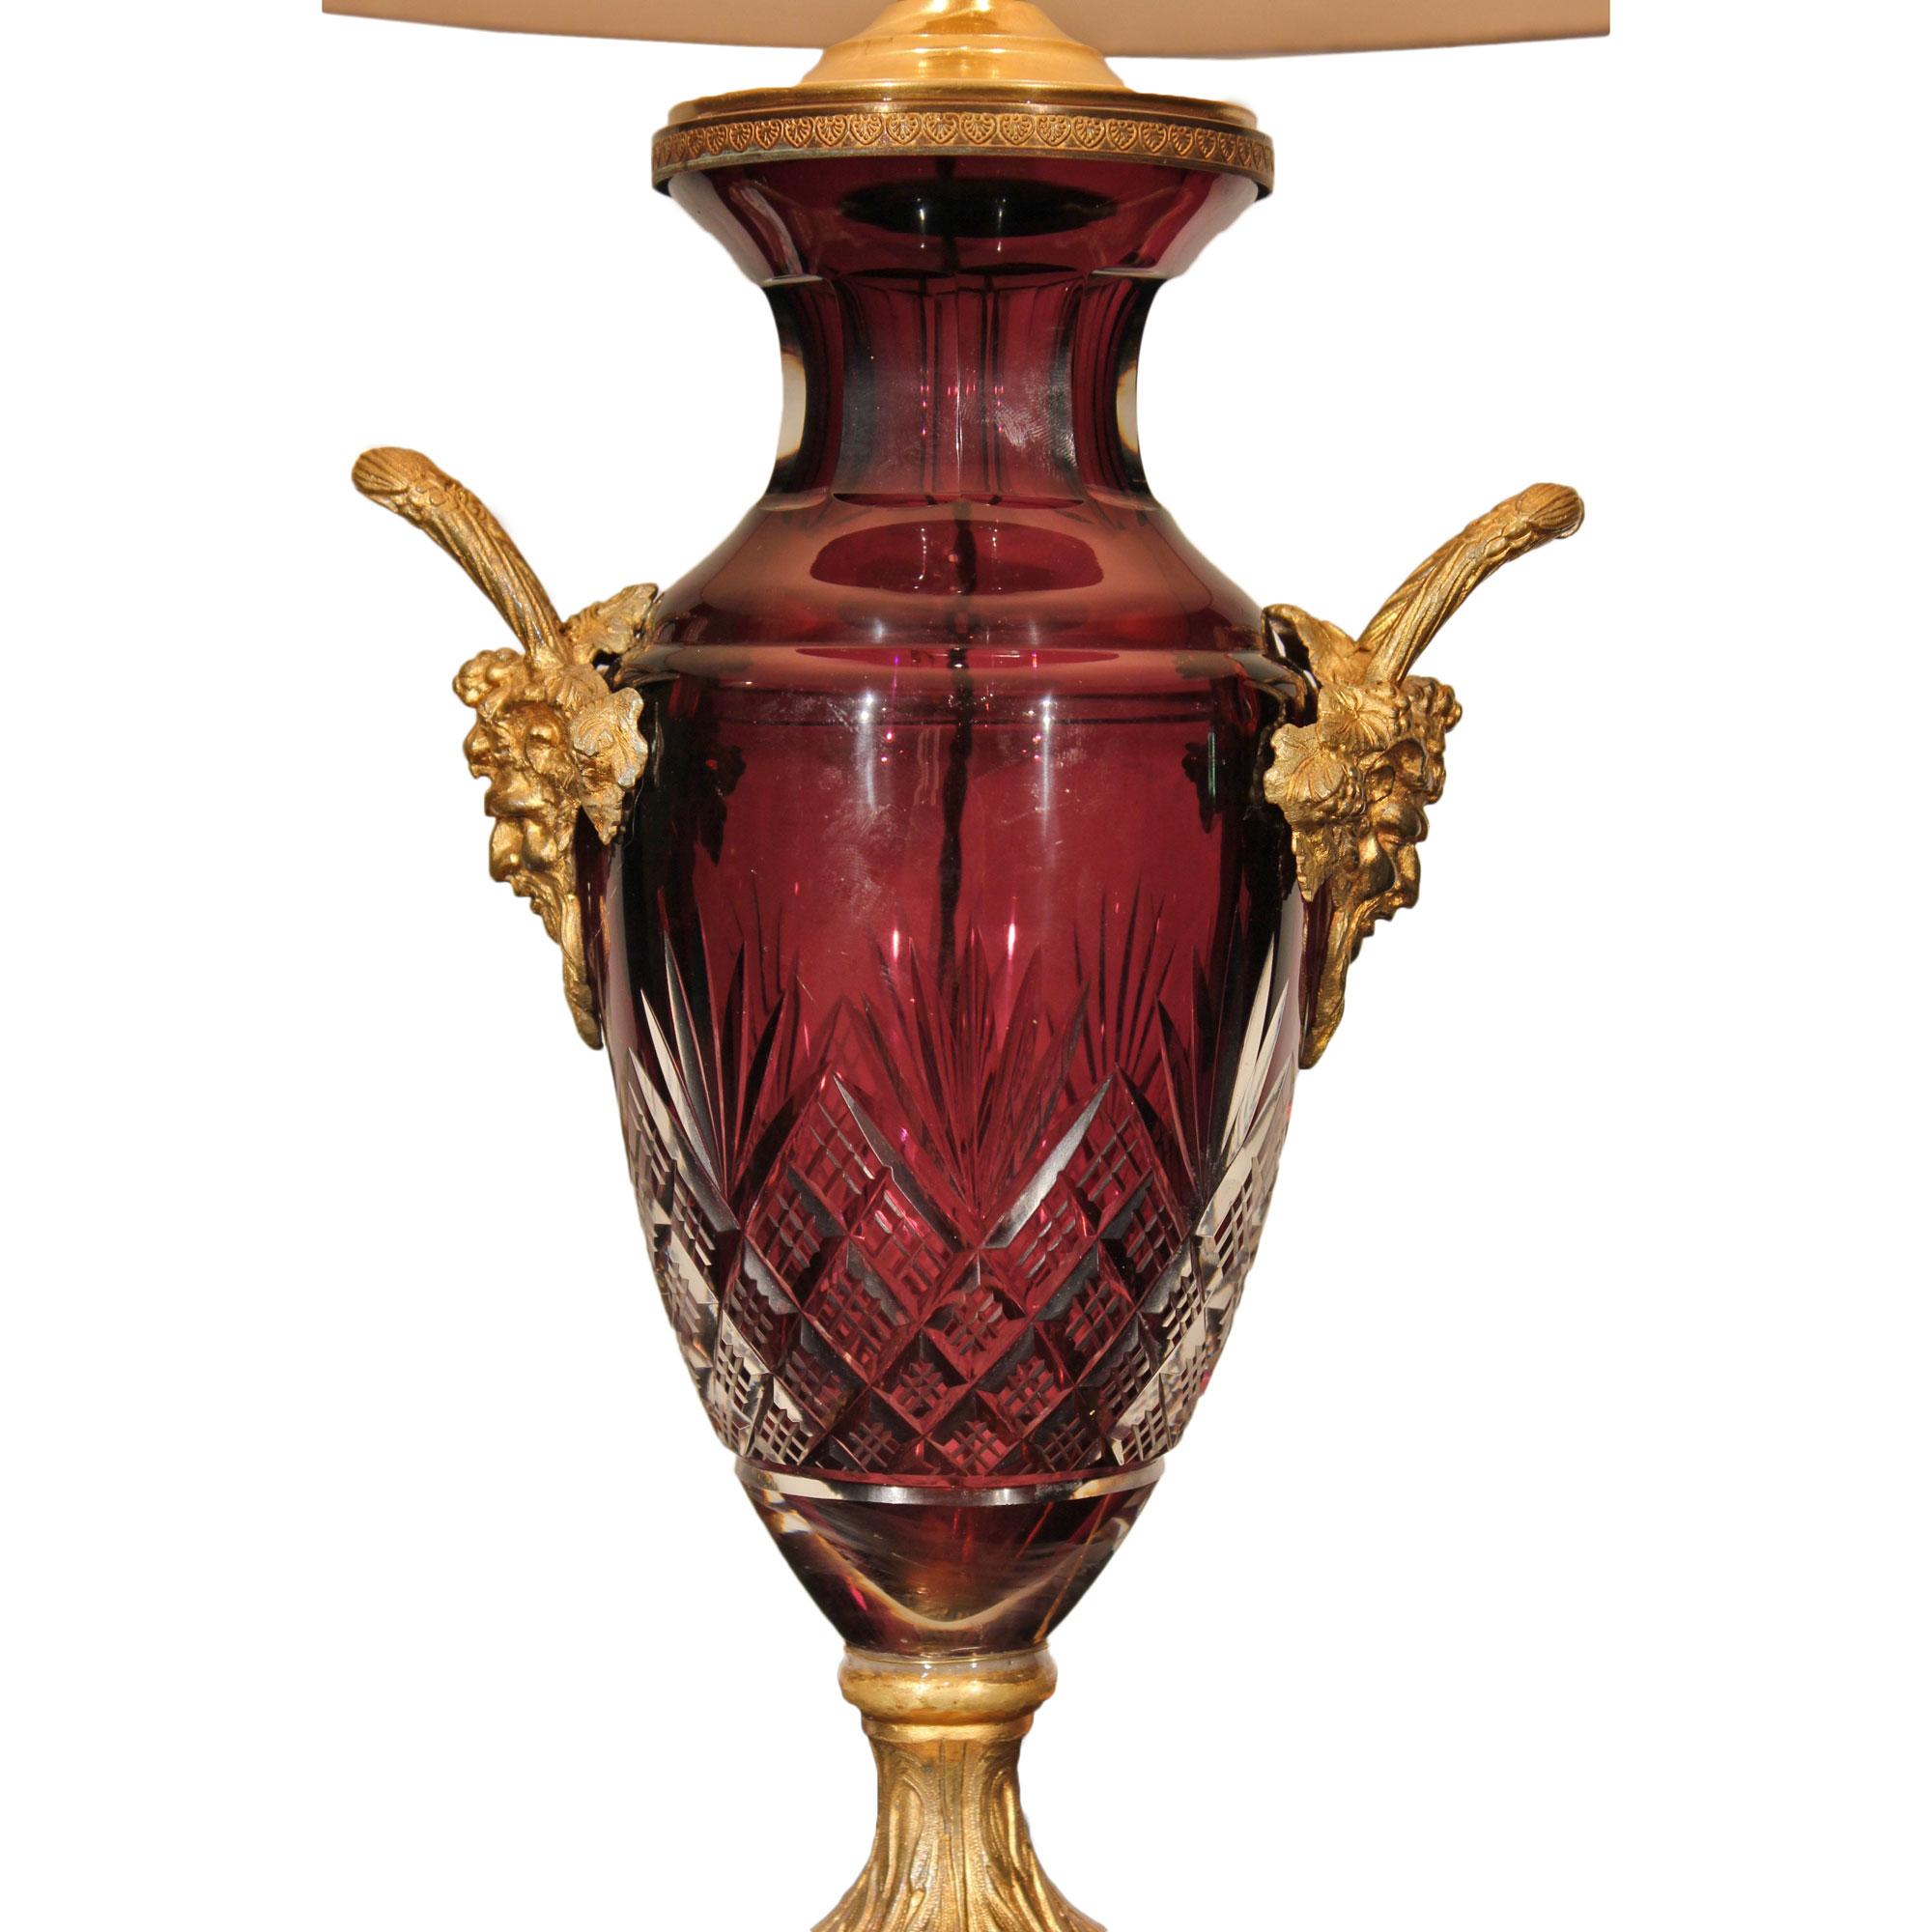 A very attractive French 19th century Louis XVI st. cut crystal urn mounted into a lamp. The lamp is raised on a square base with richly chased ormolu pedestal. Above is the wonderfully cut crystal baluster shaped urn with Oxblood red interior. The